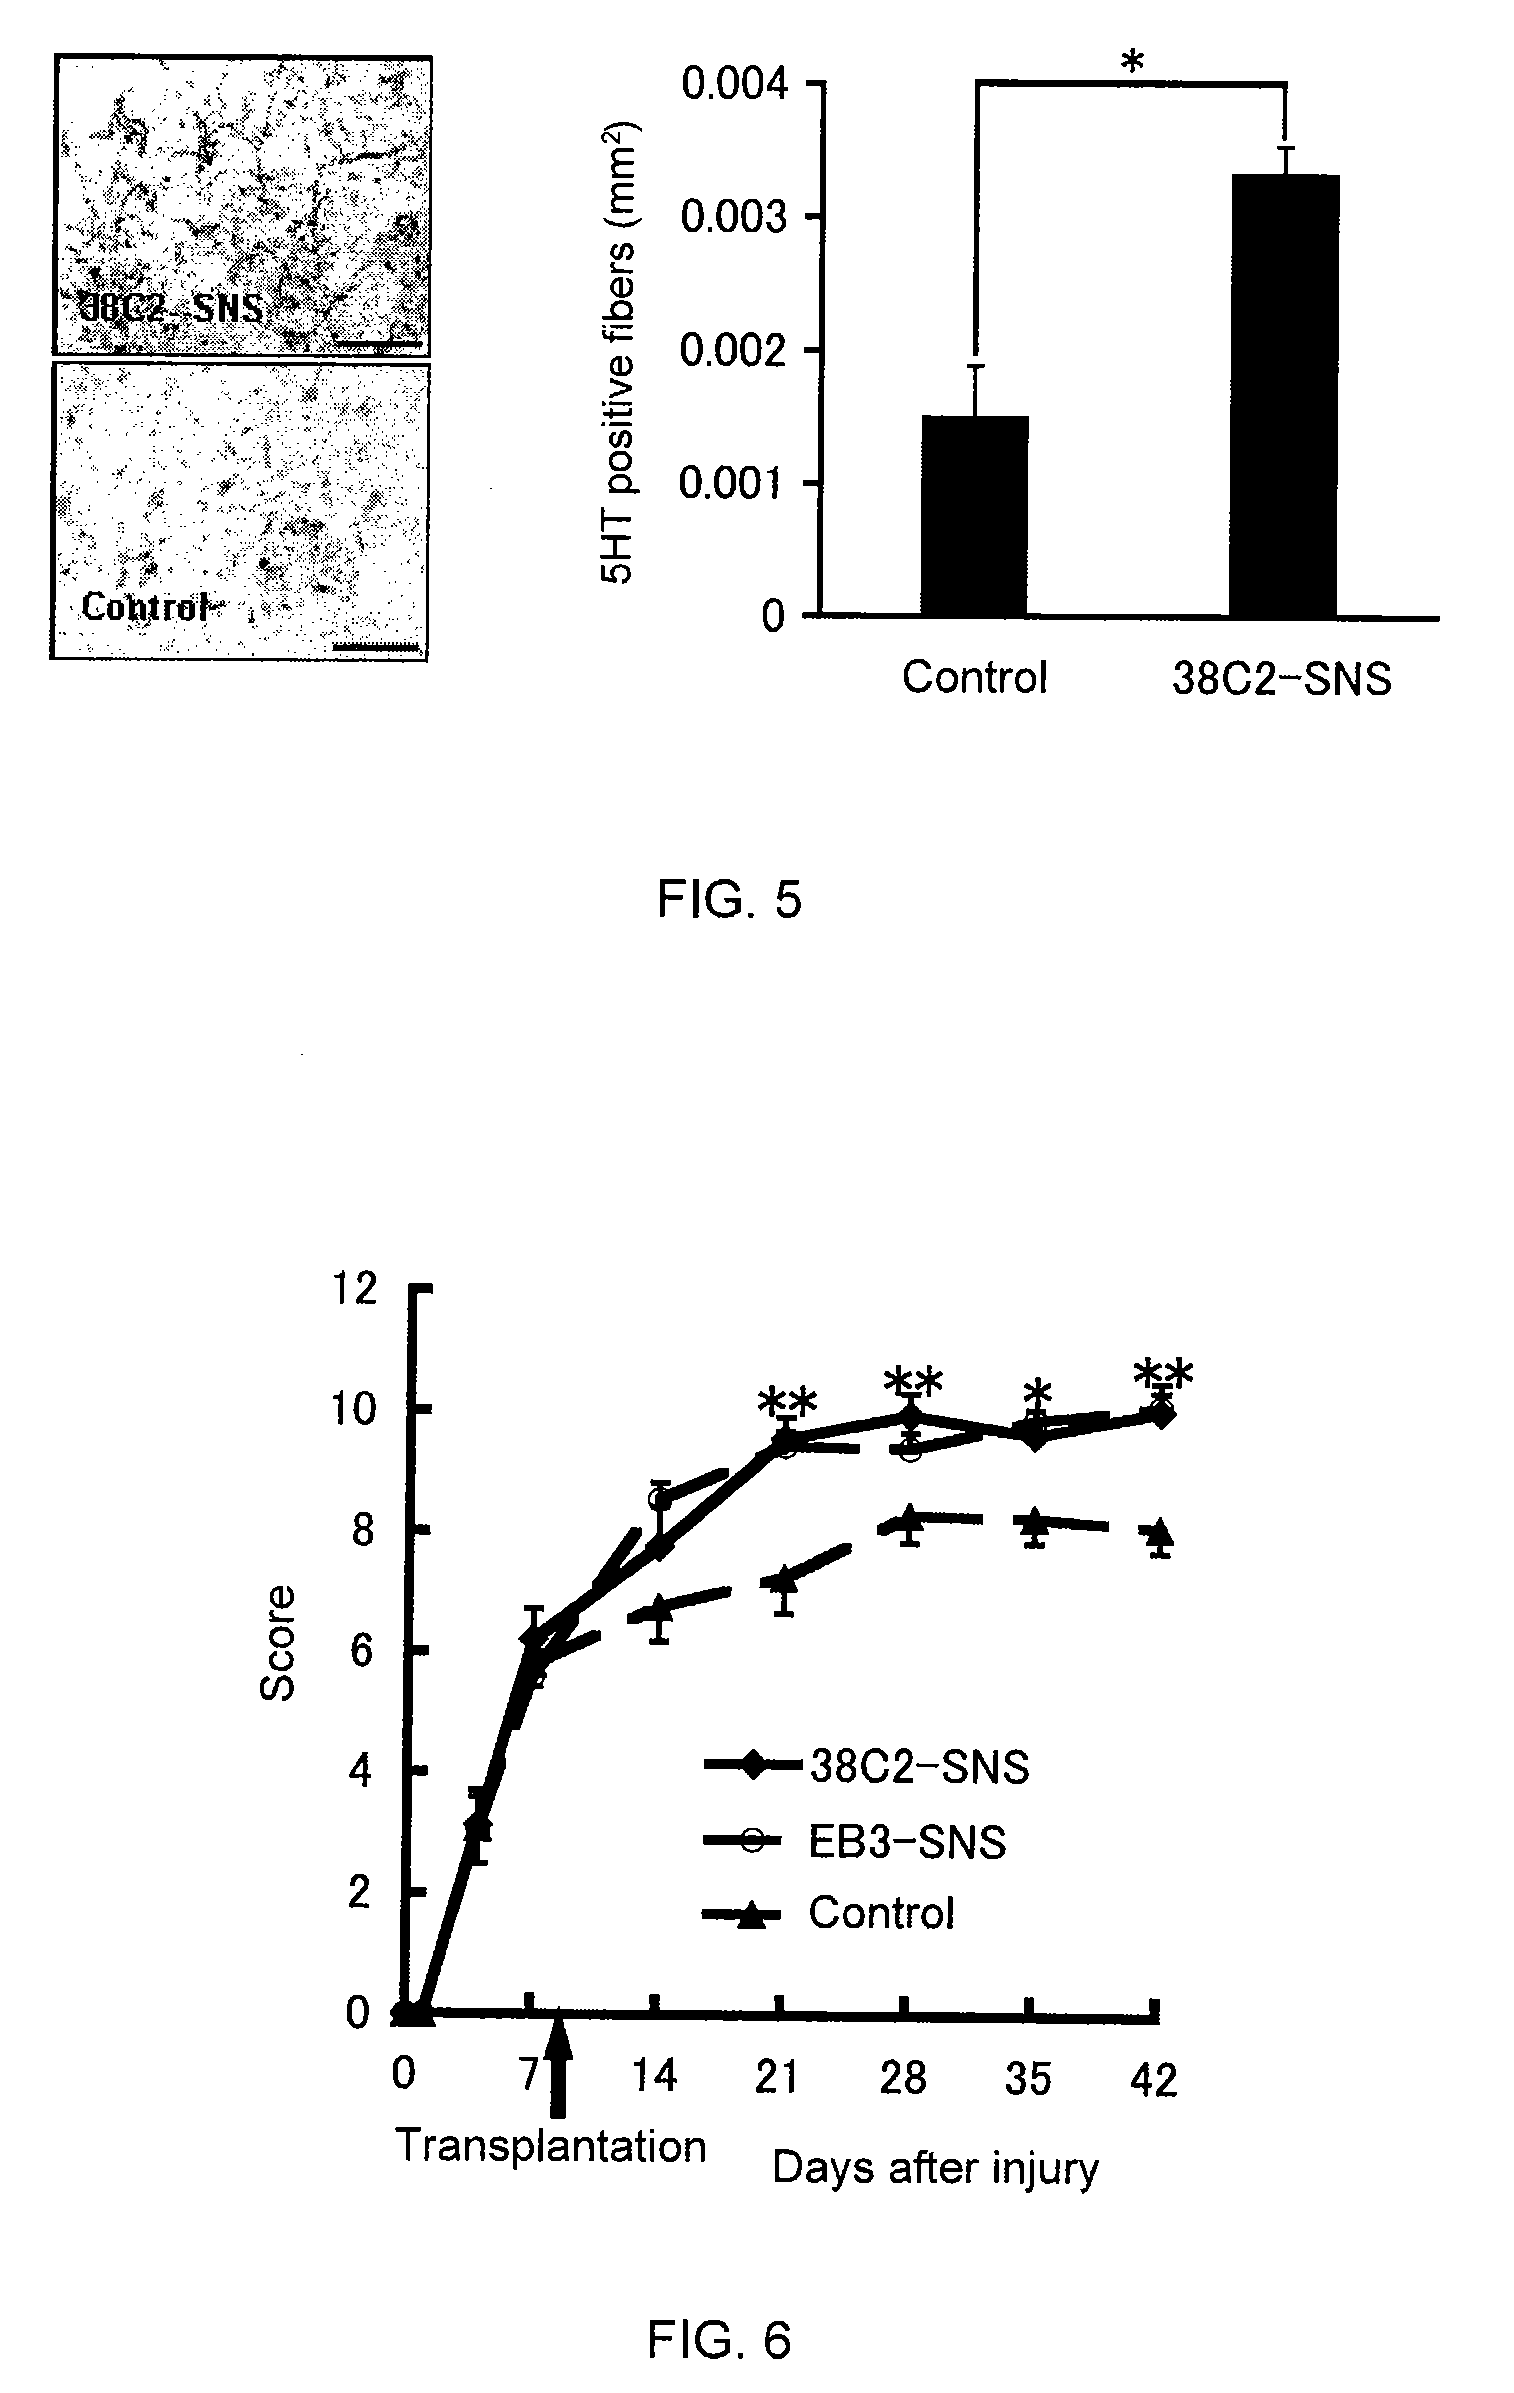 Method of treating neural defects